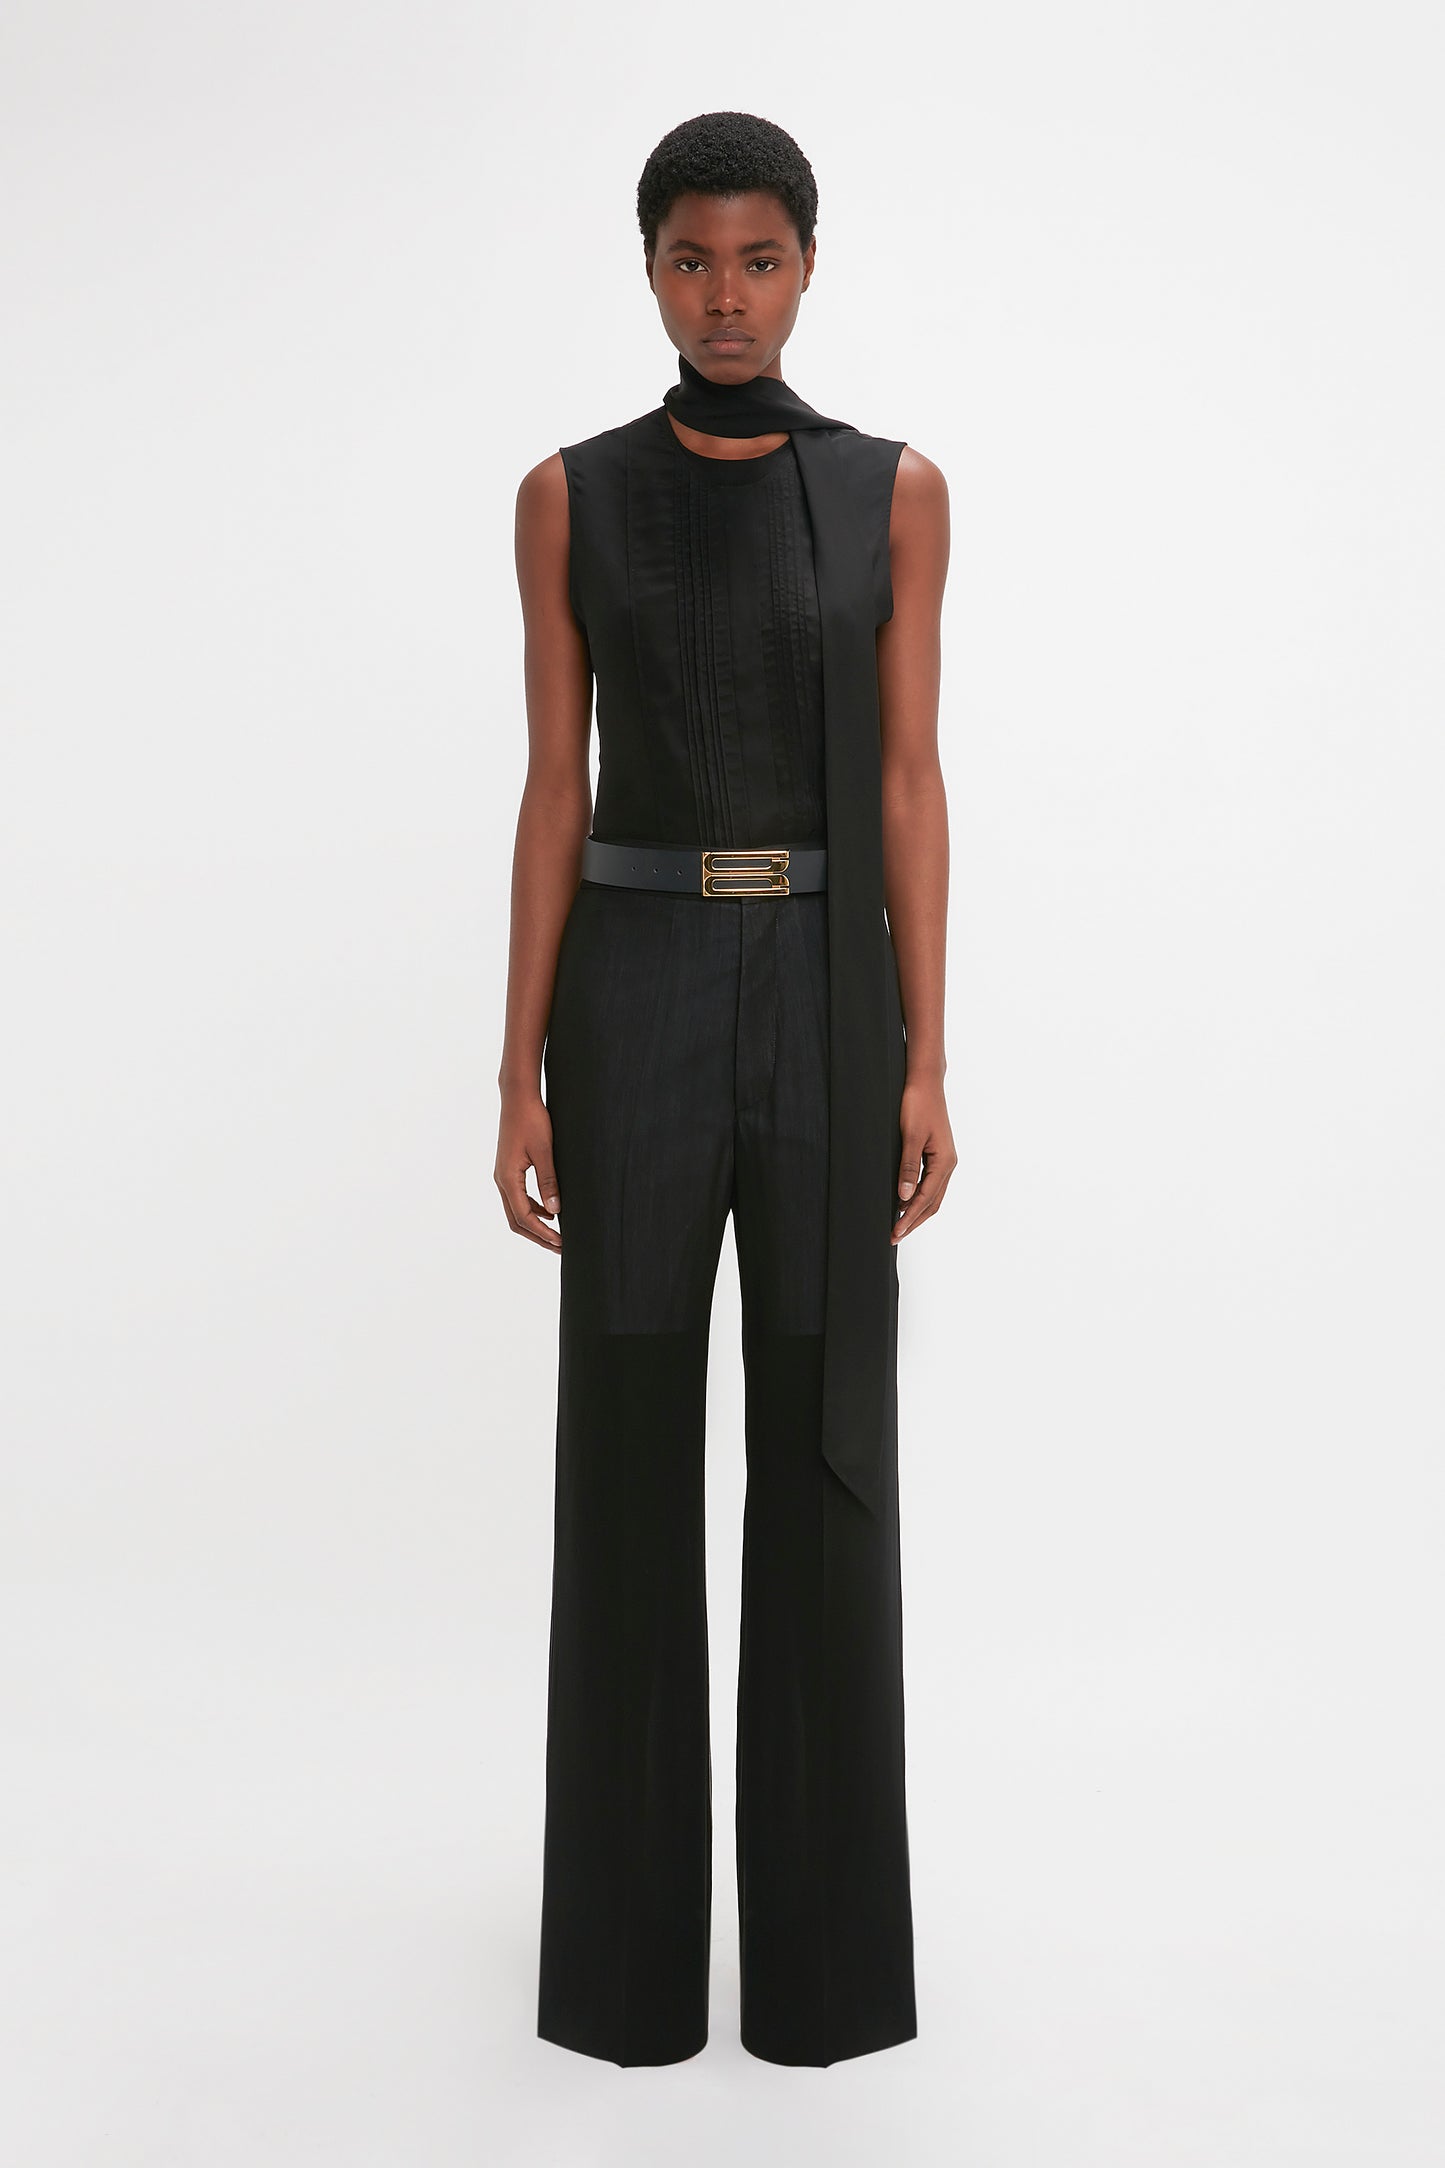 A black man models a modern black sleeveless top with a high collar and Victoria Beckham's Waistband Detail Straight Leg Trouser In Black in a white studio setting.